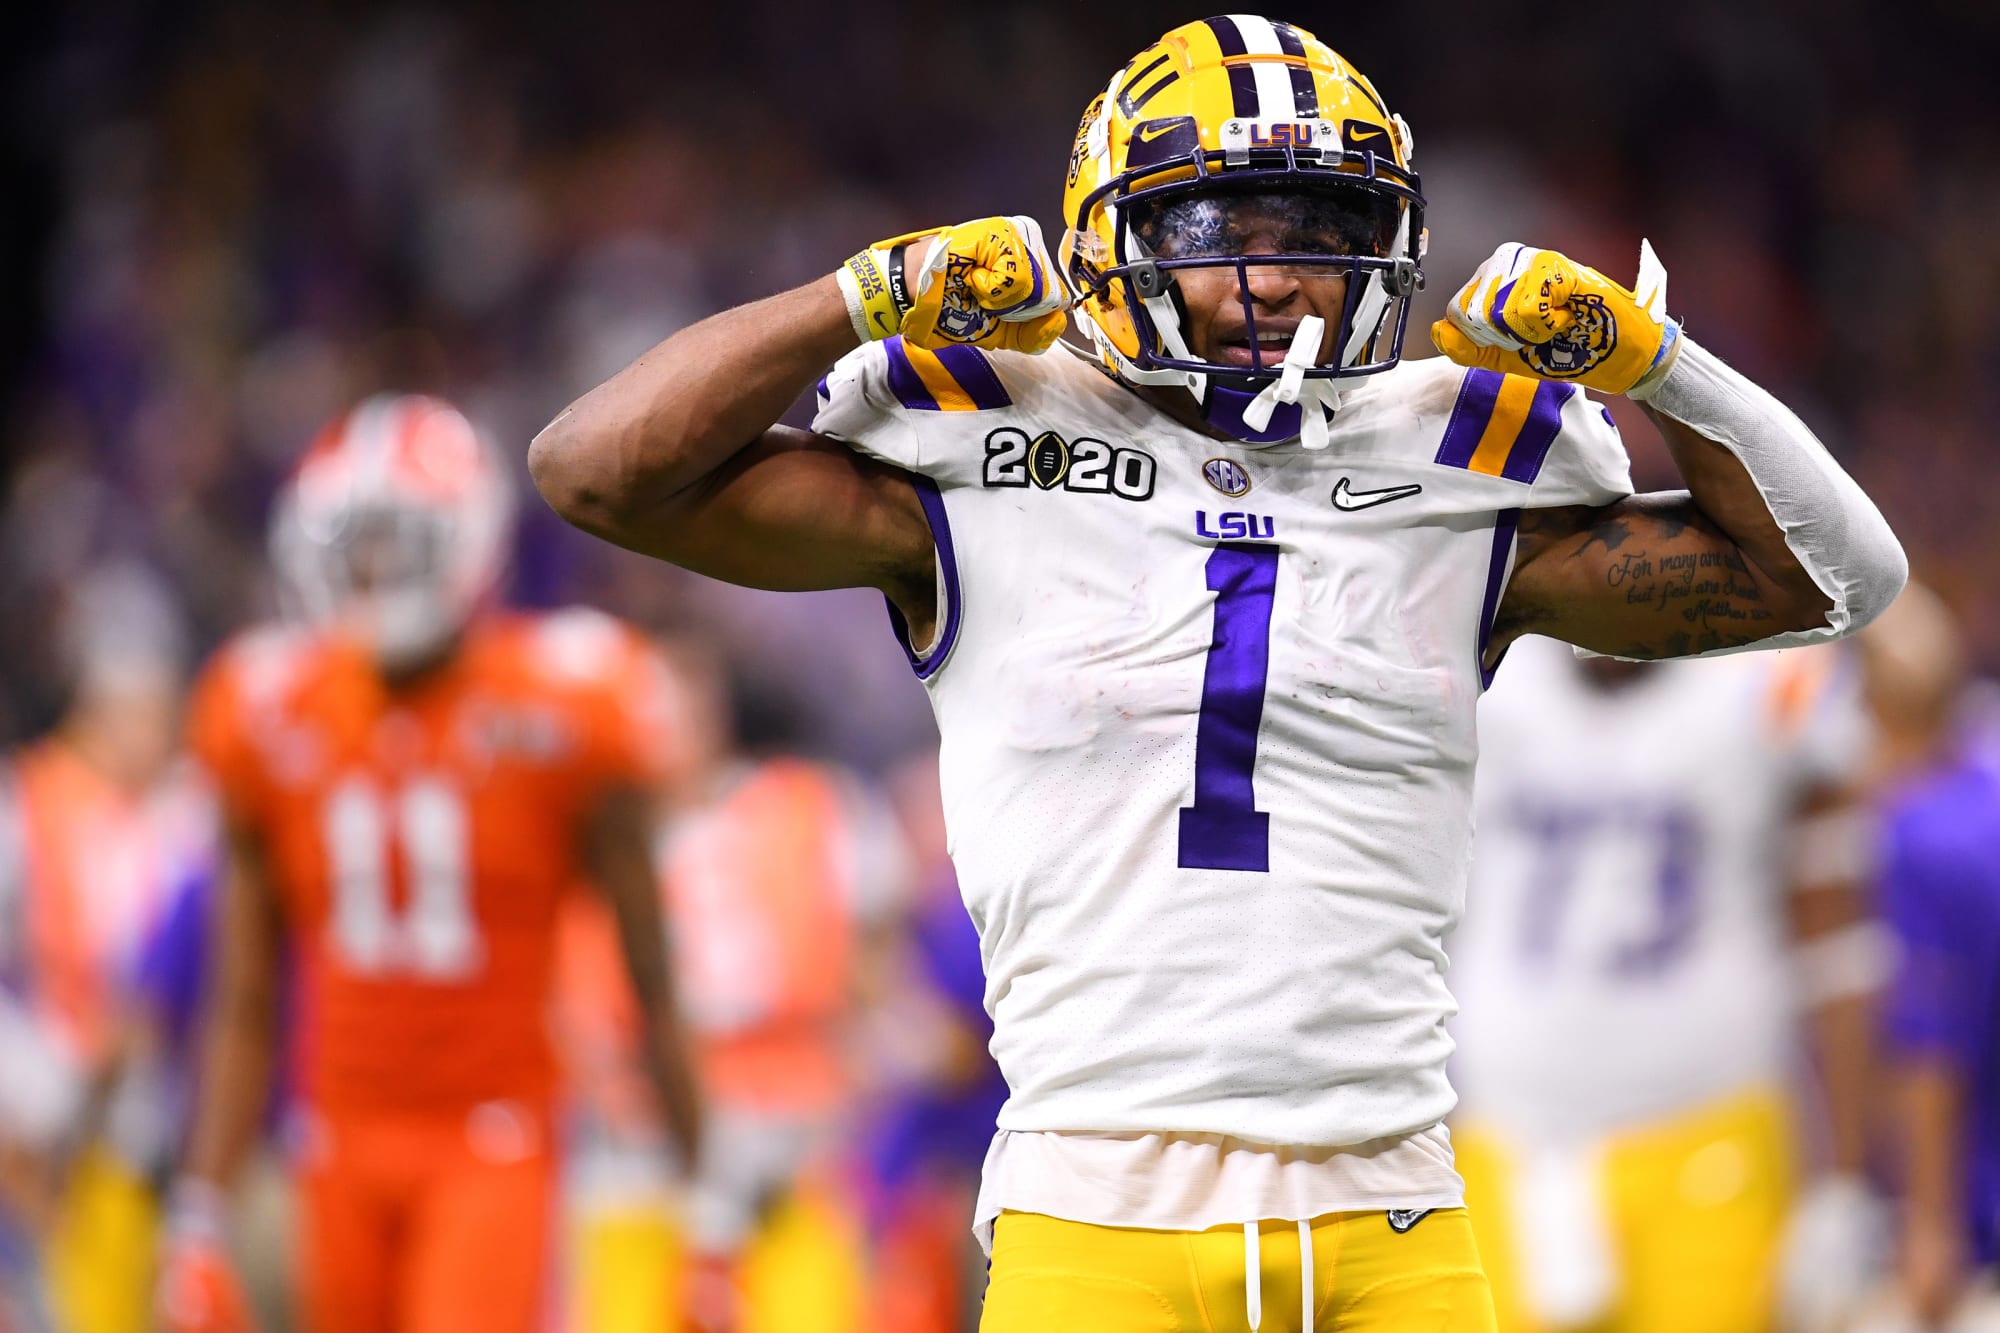 NFL Draft Ja'Marr Chase has 'Hall of Fame' potential, league insiders say